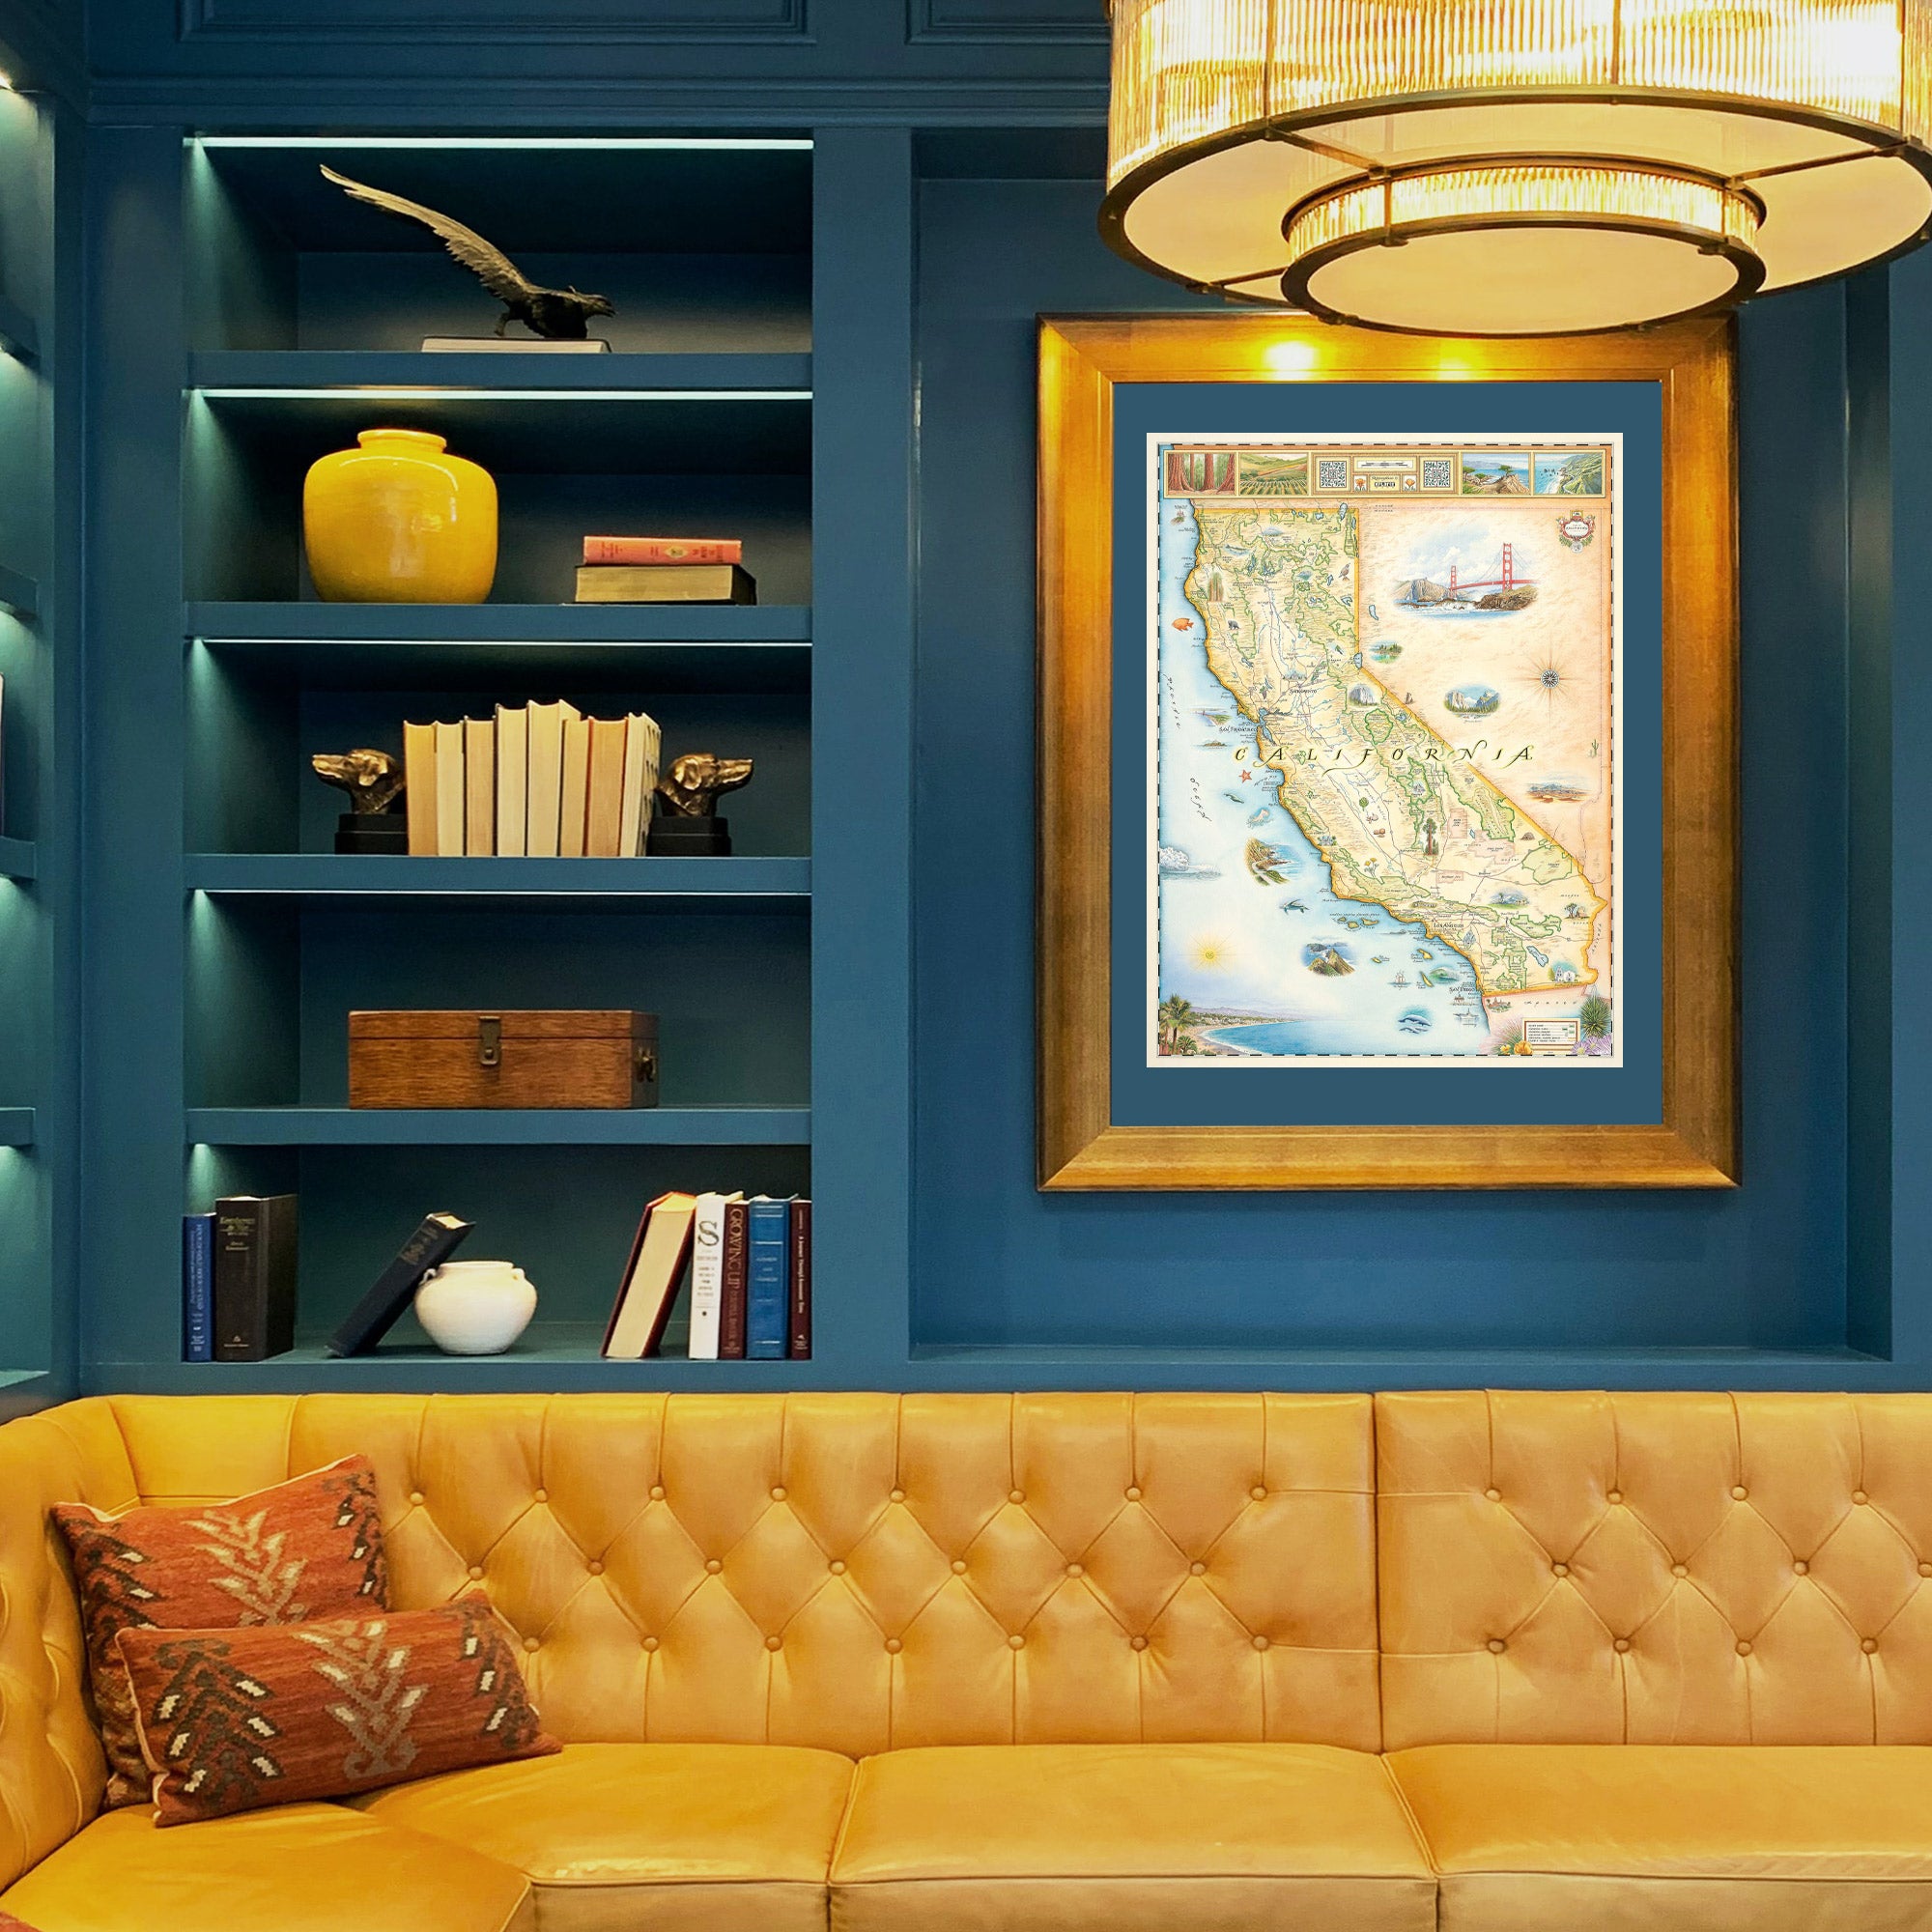 California hand-drawn map framed with blue mat hanging over a gold couch.